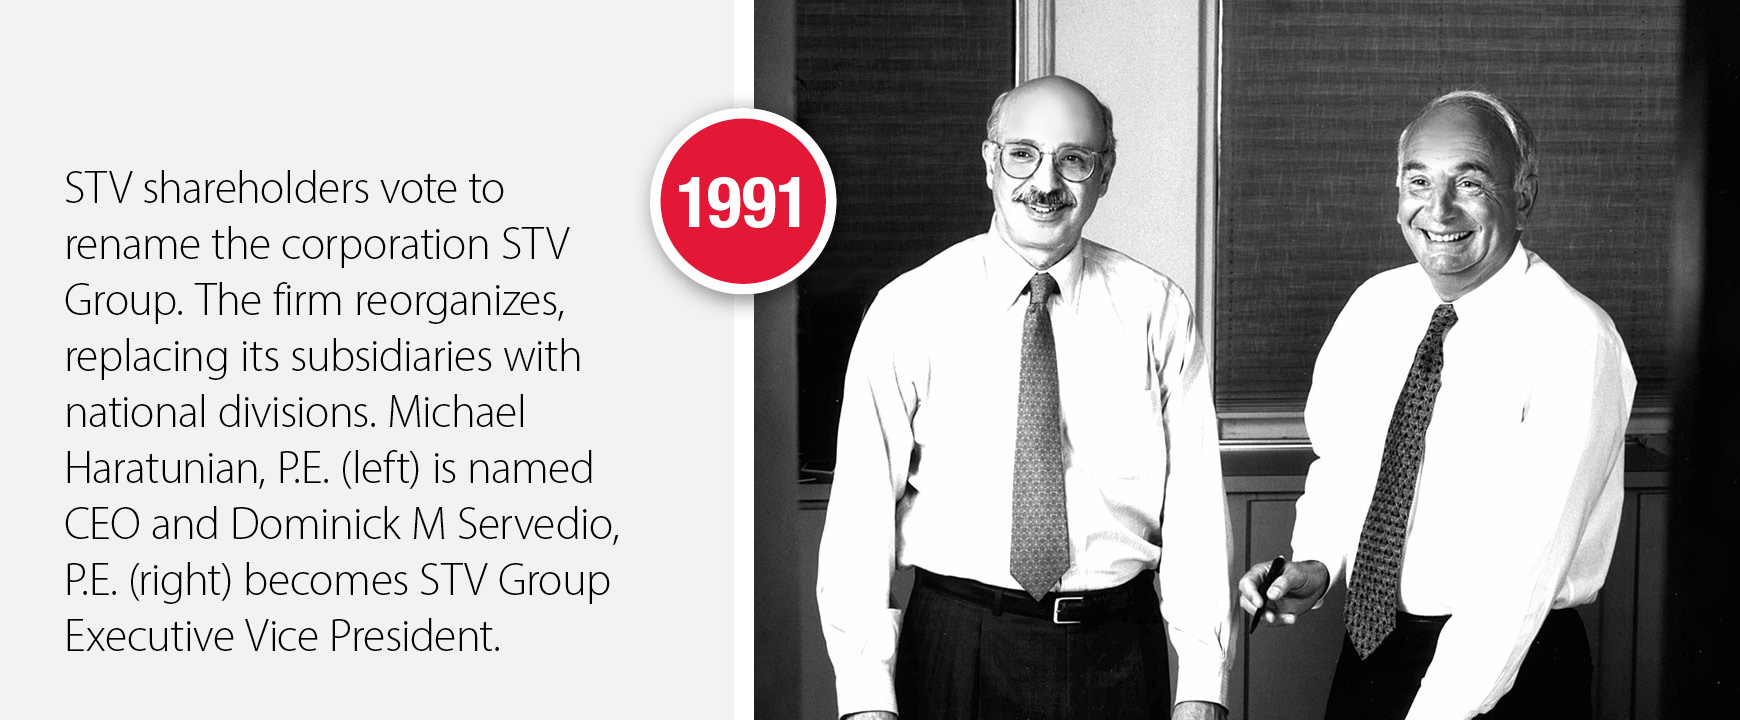 1991 - Corporation renamed to STV Group